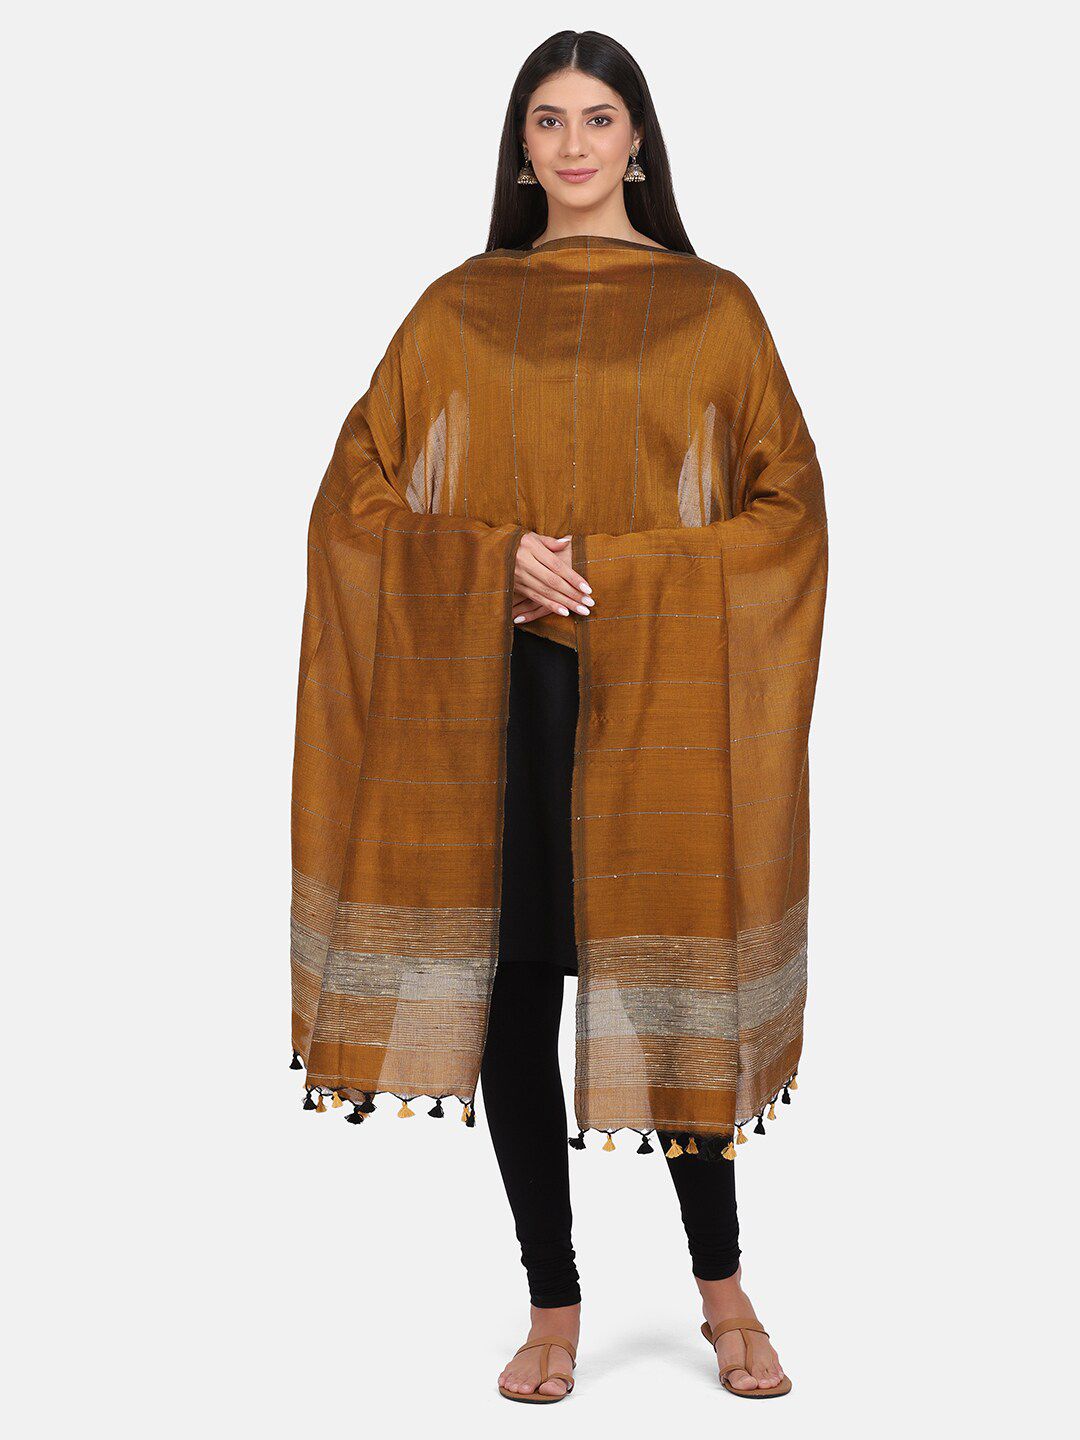 THE WEAVE TRAVELLER Brown & Grey Woven Design Dupatta Price in India